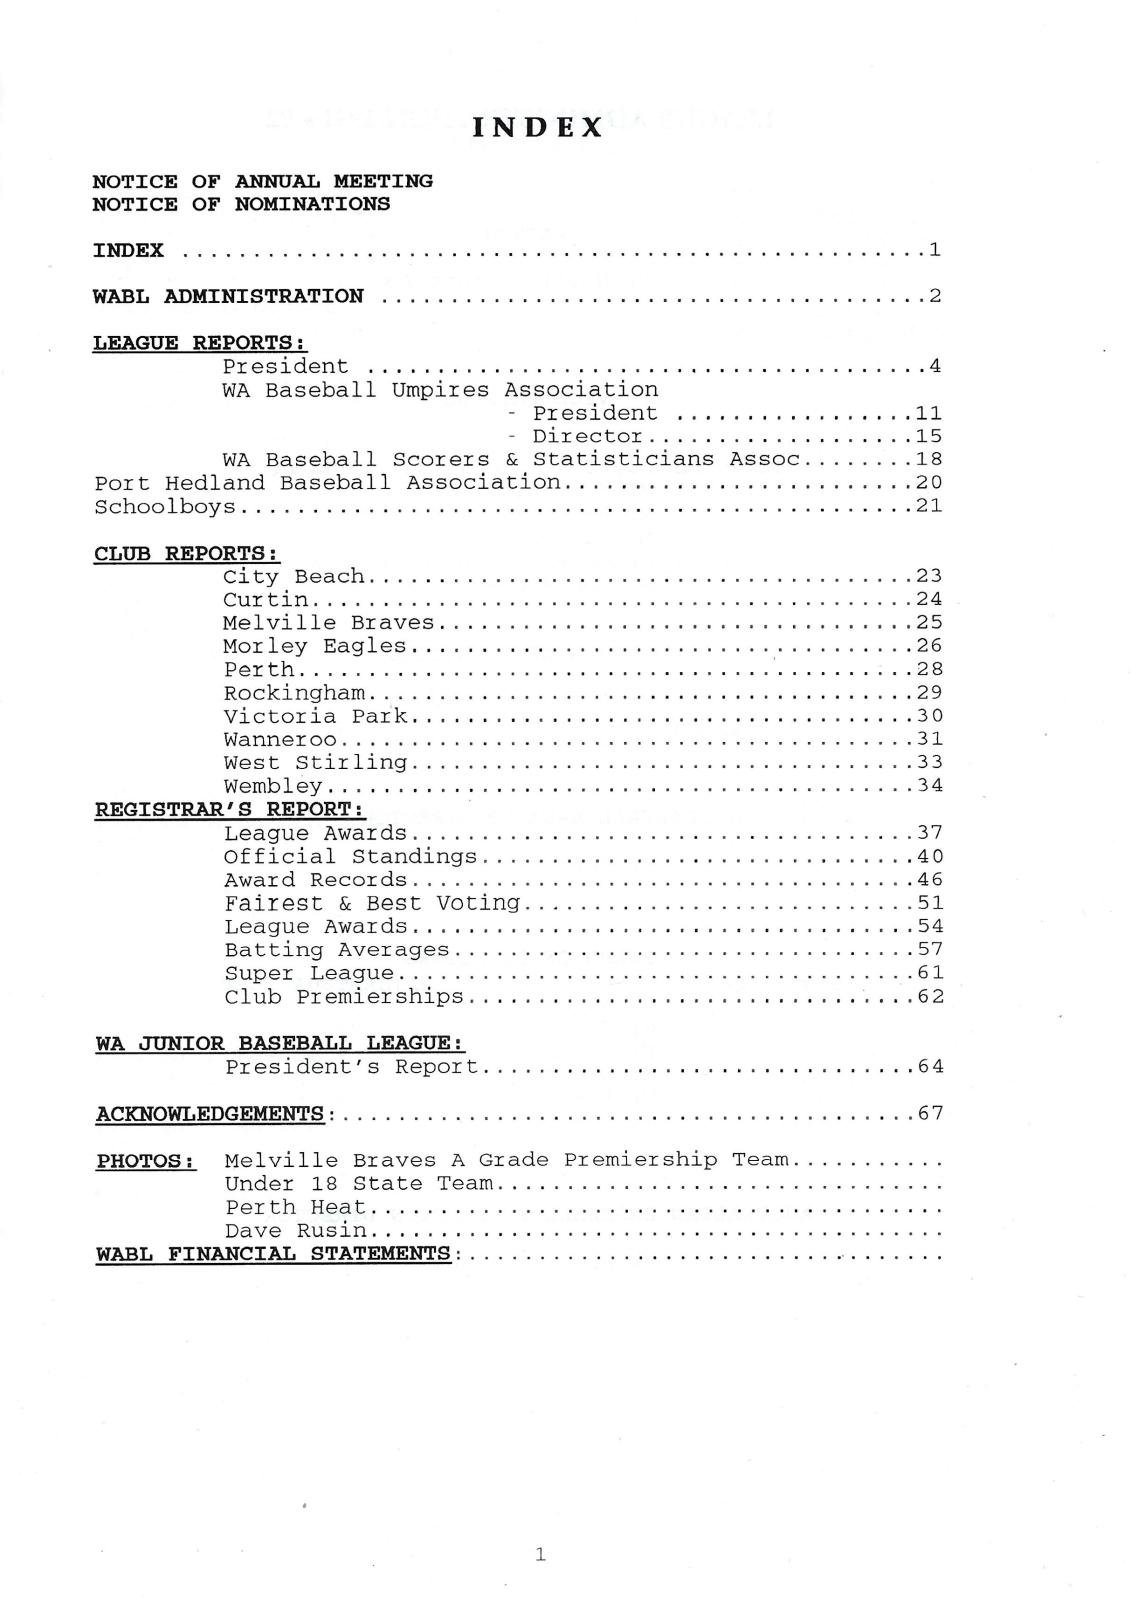 West Australian Baseball League 57th Annual Report 1991-92 index page